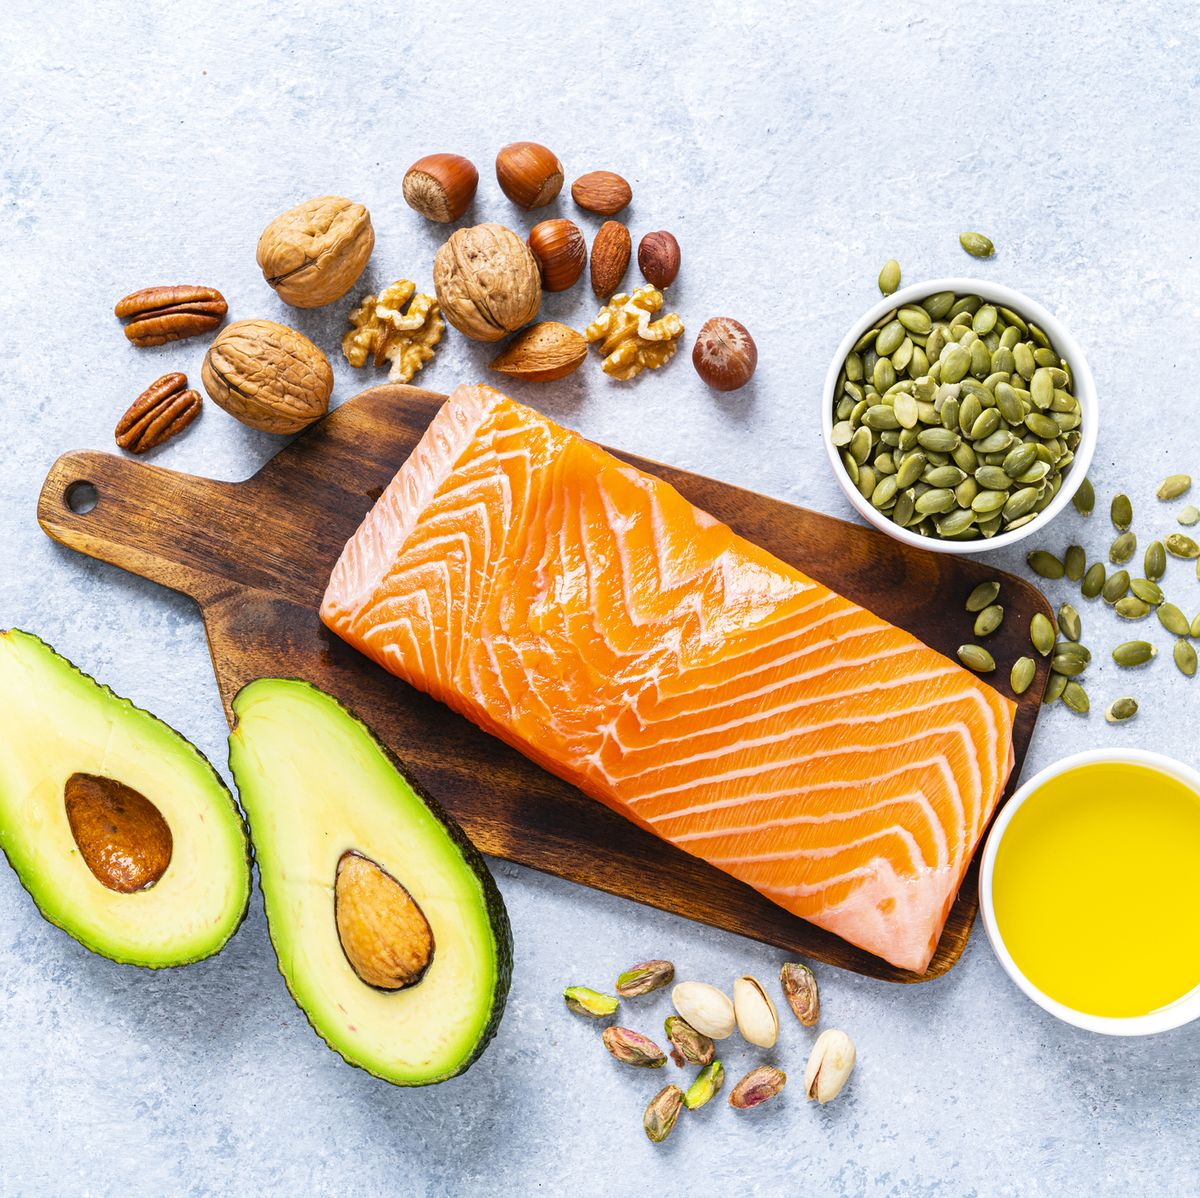 Healthy fats for athletic performance